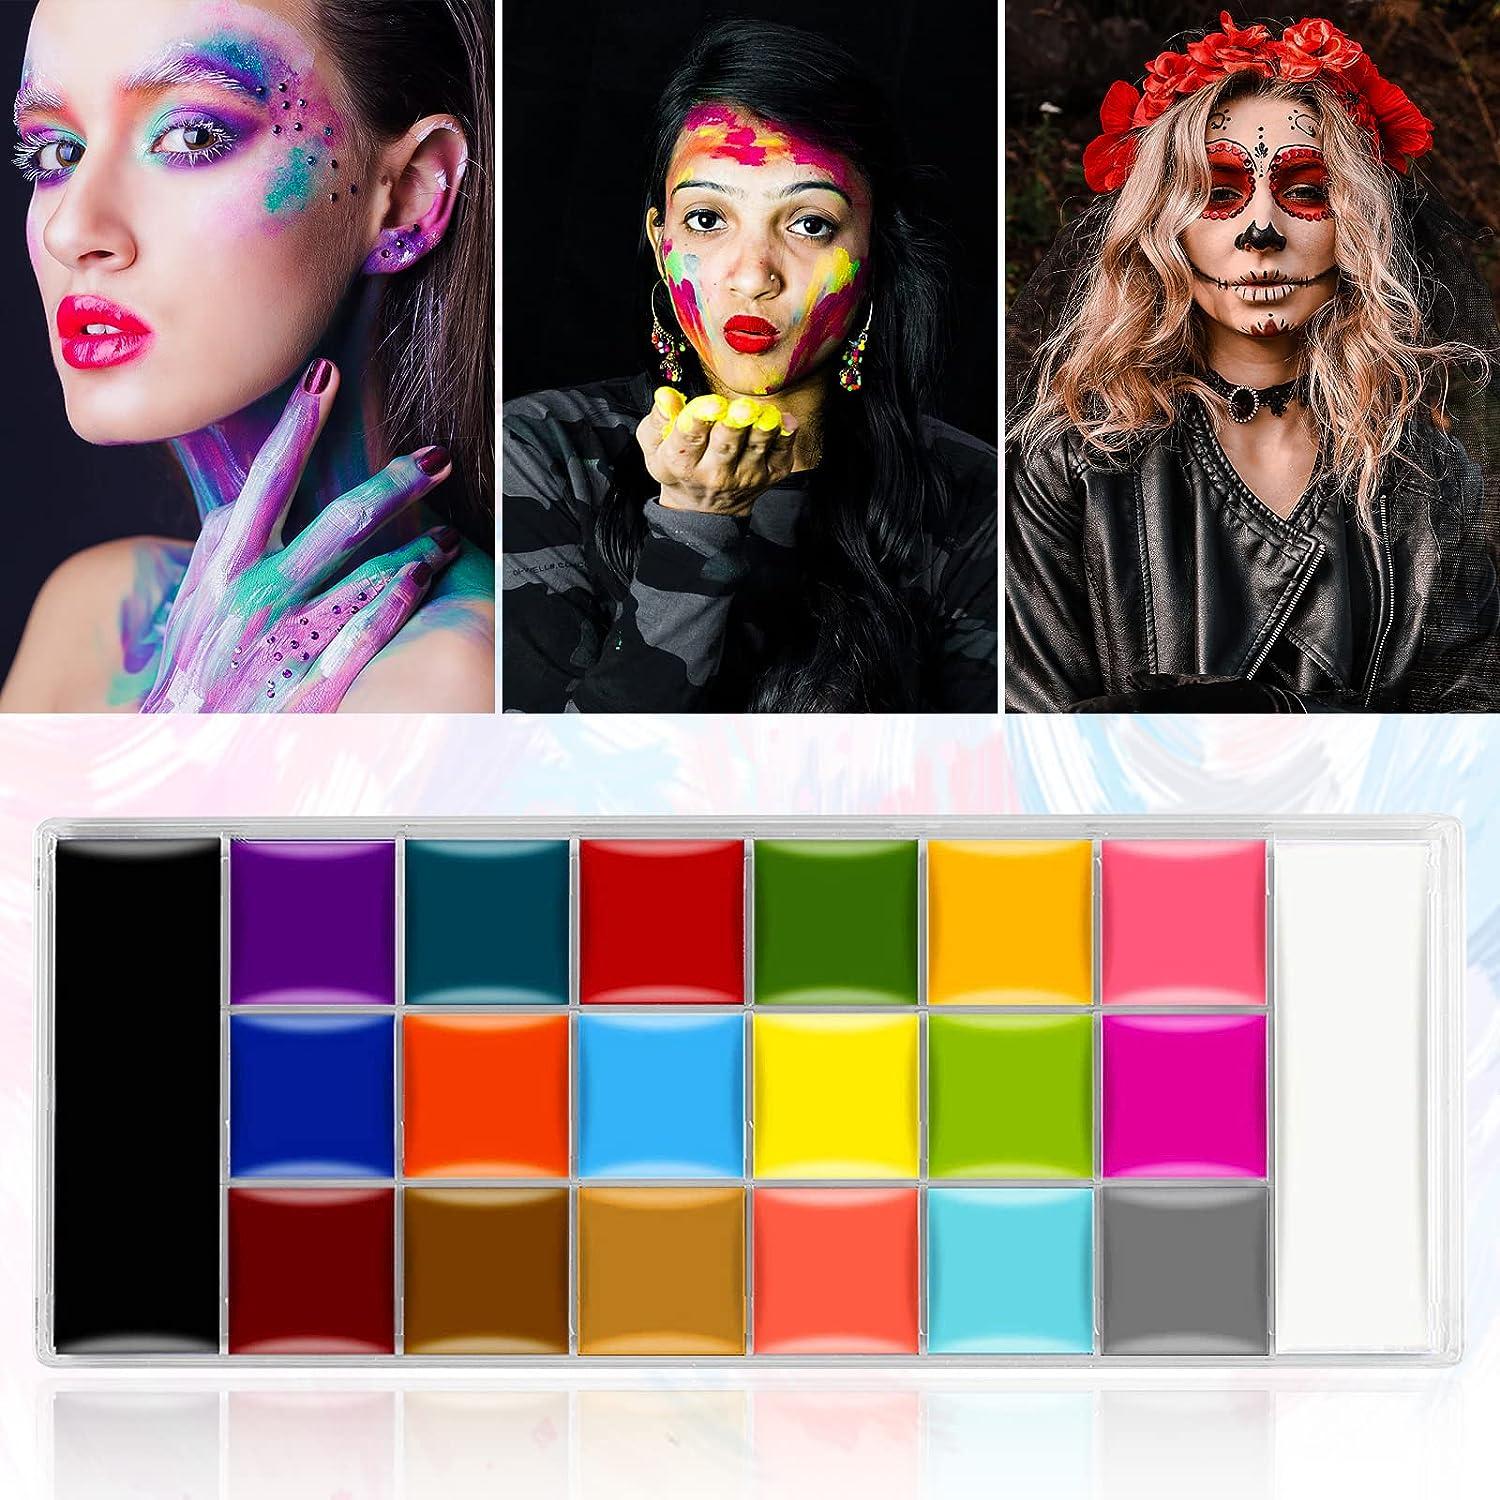 Temporary Tattoos Face Body Paint Halloween Party Fancy Art Makeup Pigment  Painting Beauty MakeupTool Cosplay Makeup KIT 230327 From Zuo06, $13.6